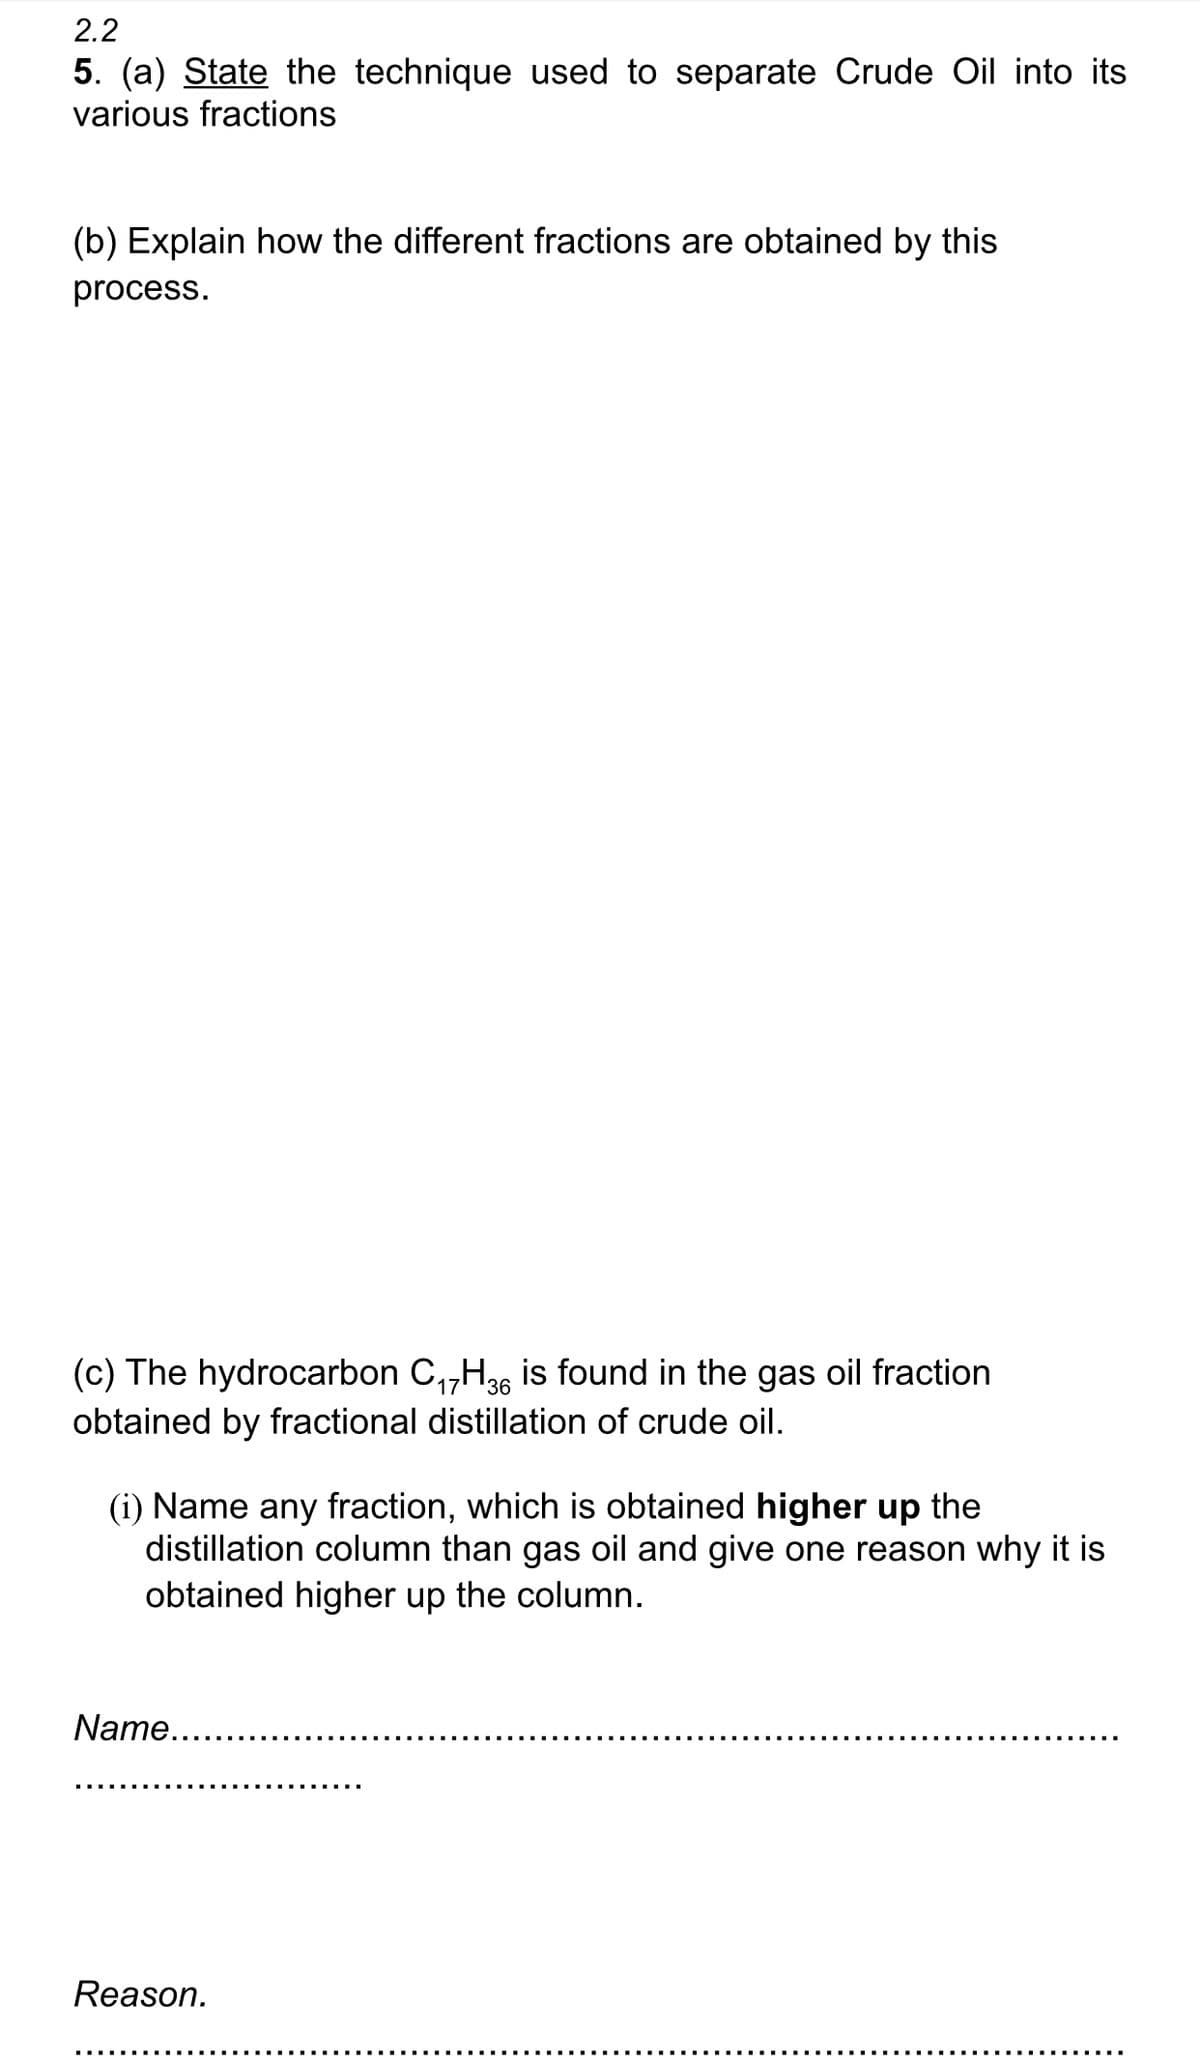 2.2
5. (a) State the technique used to separate Crude Oil into its
various fractions
(b) Explain how the different fractions are obtained by this
process.
17
(c) The hydrocarbon C₁7H 36 is found in the gas oil fraction
obtained by fractional distillation of crude oil.
(i) Name any fraction, which is obtained higher up the
distillation column than gas oil and give one reason why it is
obtained higher up the column.
Name....
Reason.